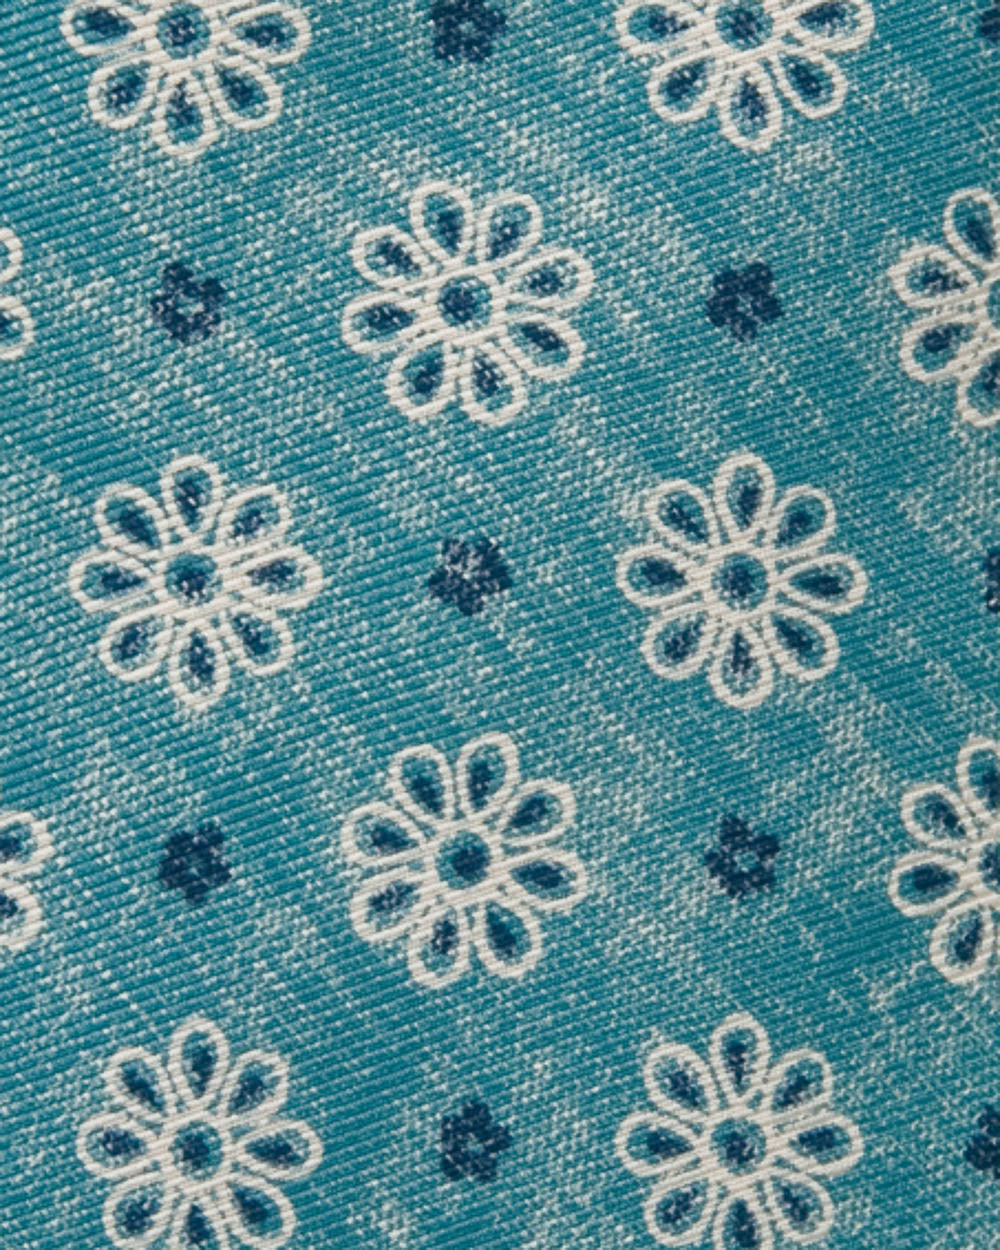 Aqua with Blue and White Floral Tie